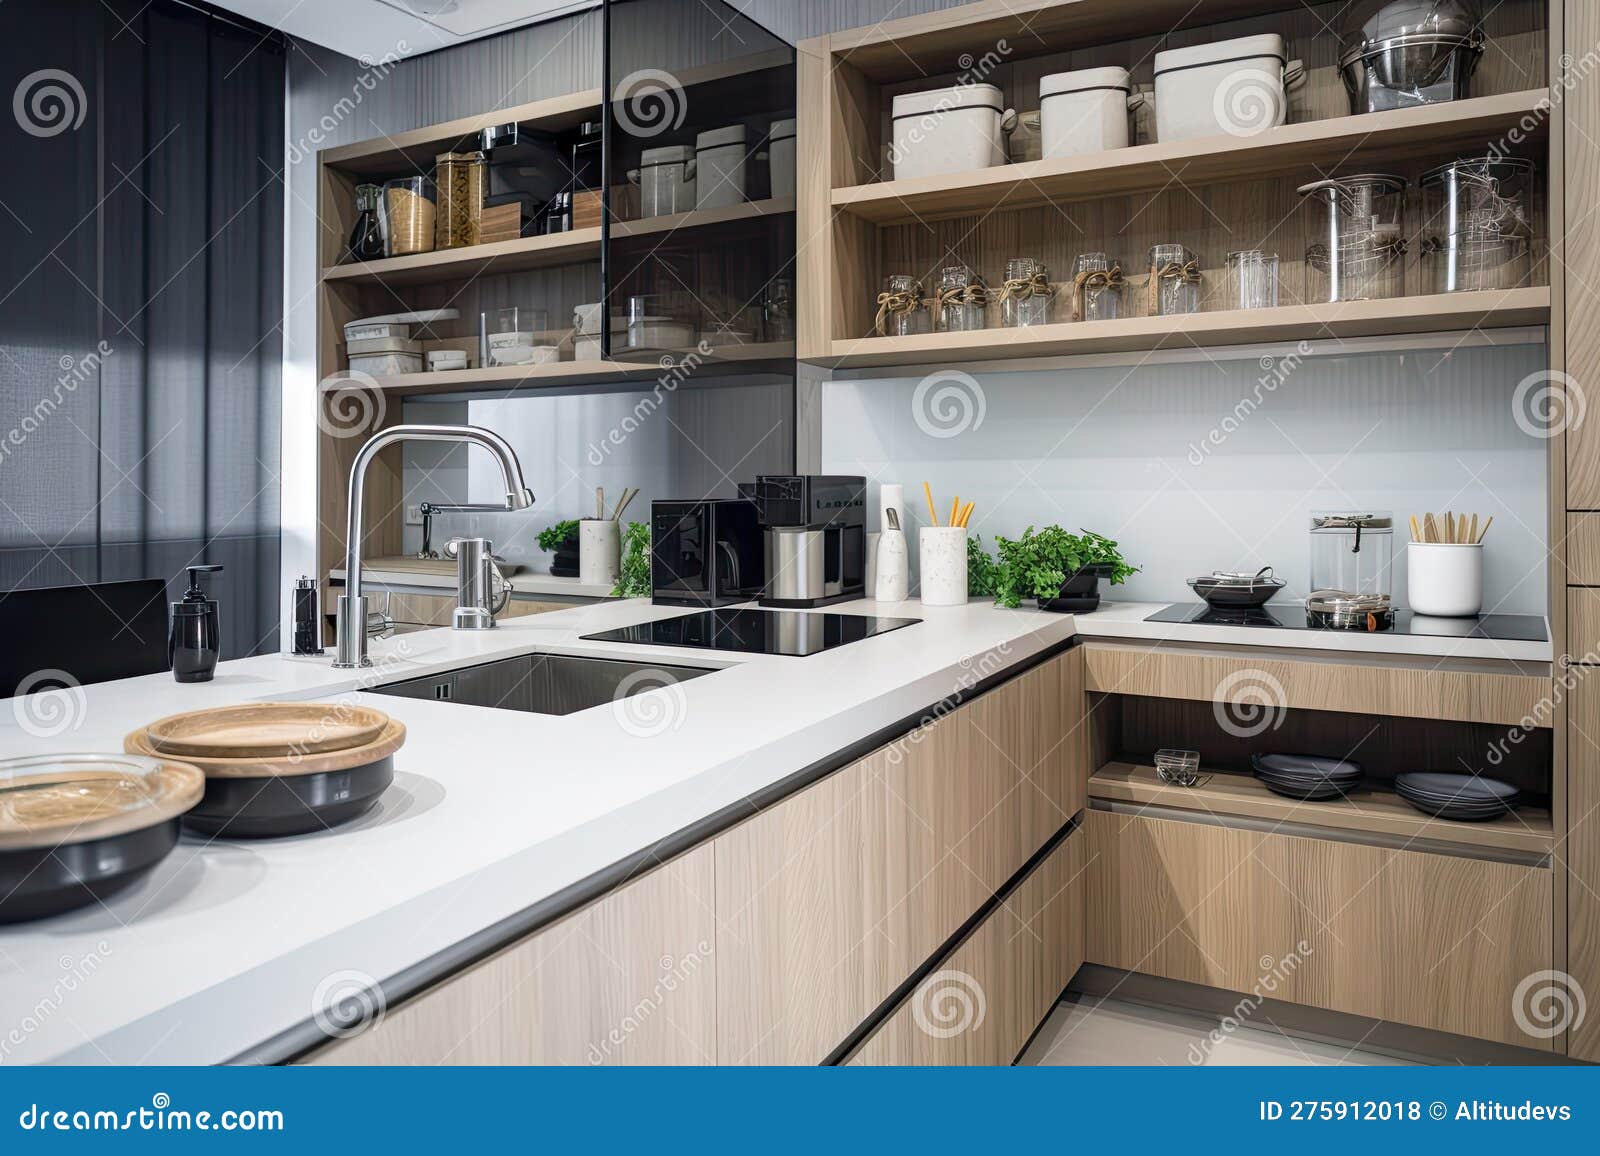 A Sleek and Modern Kitchen, with Well-organized Food Storage Containers ...